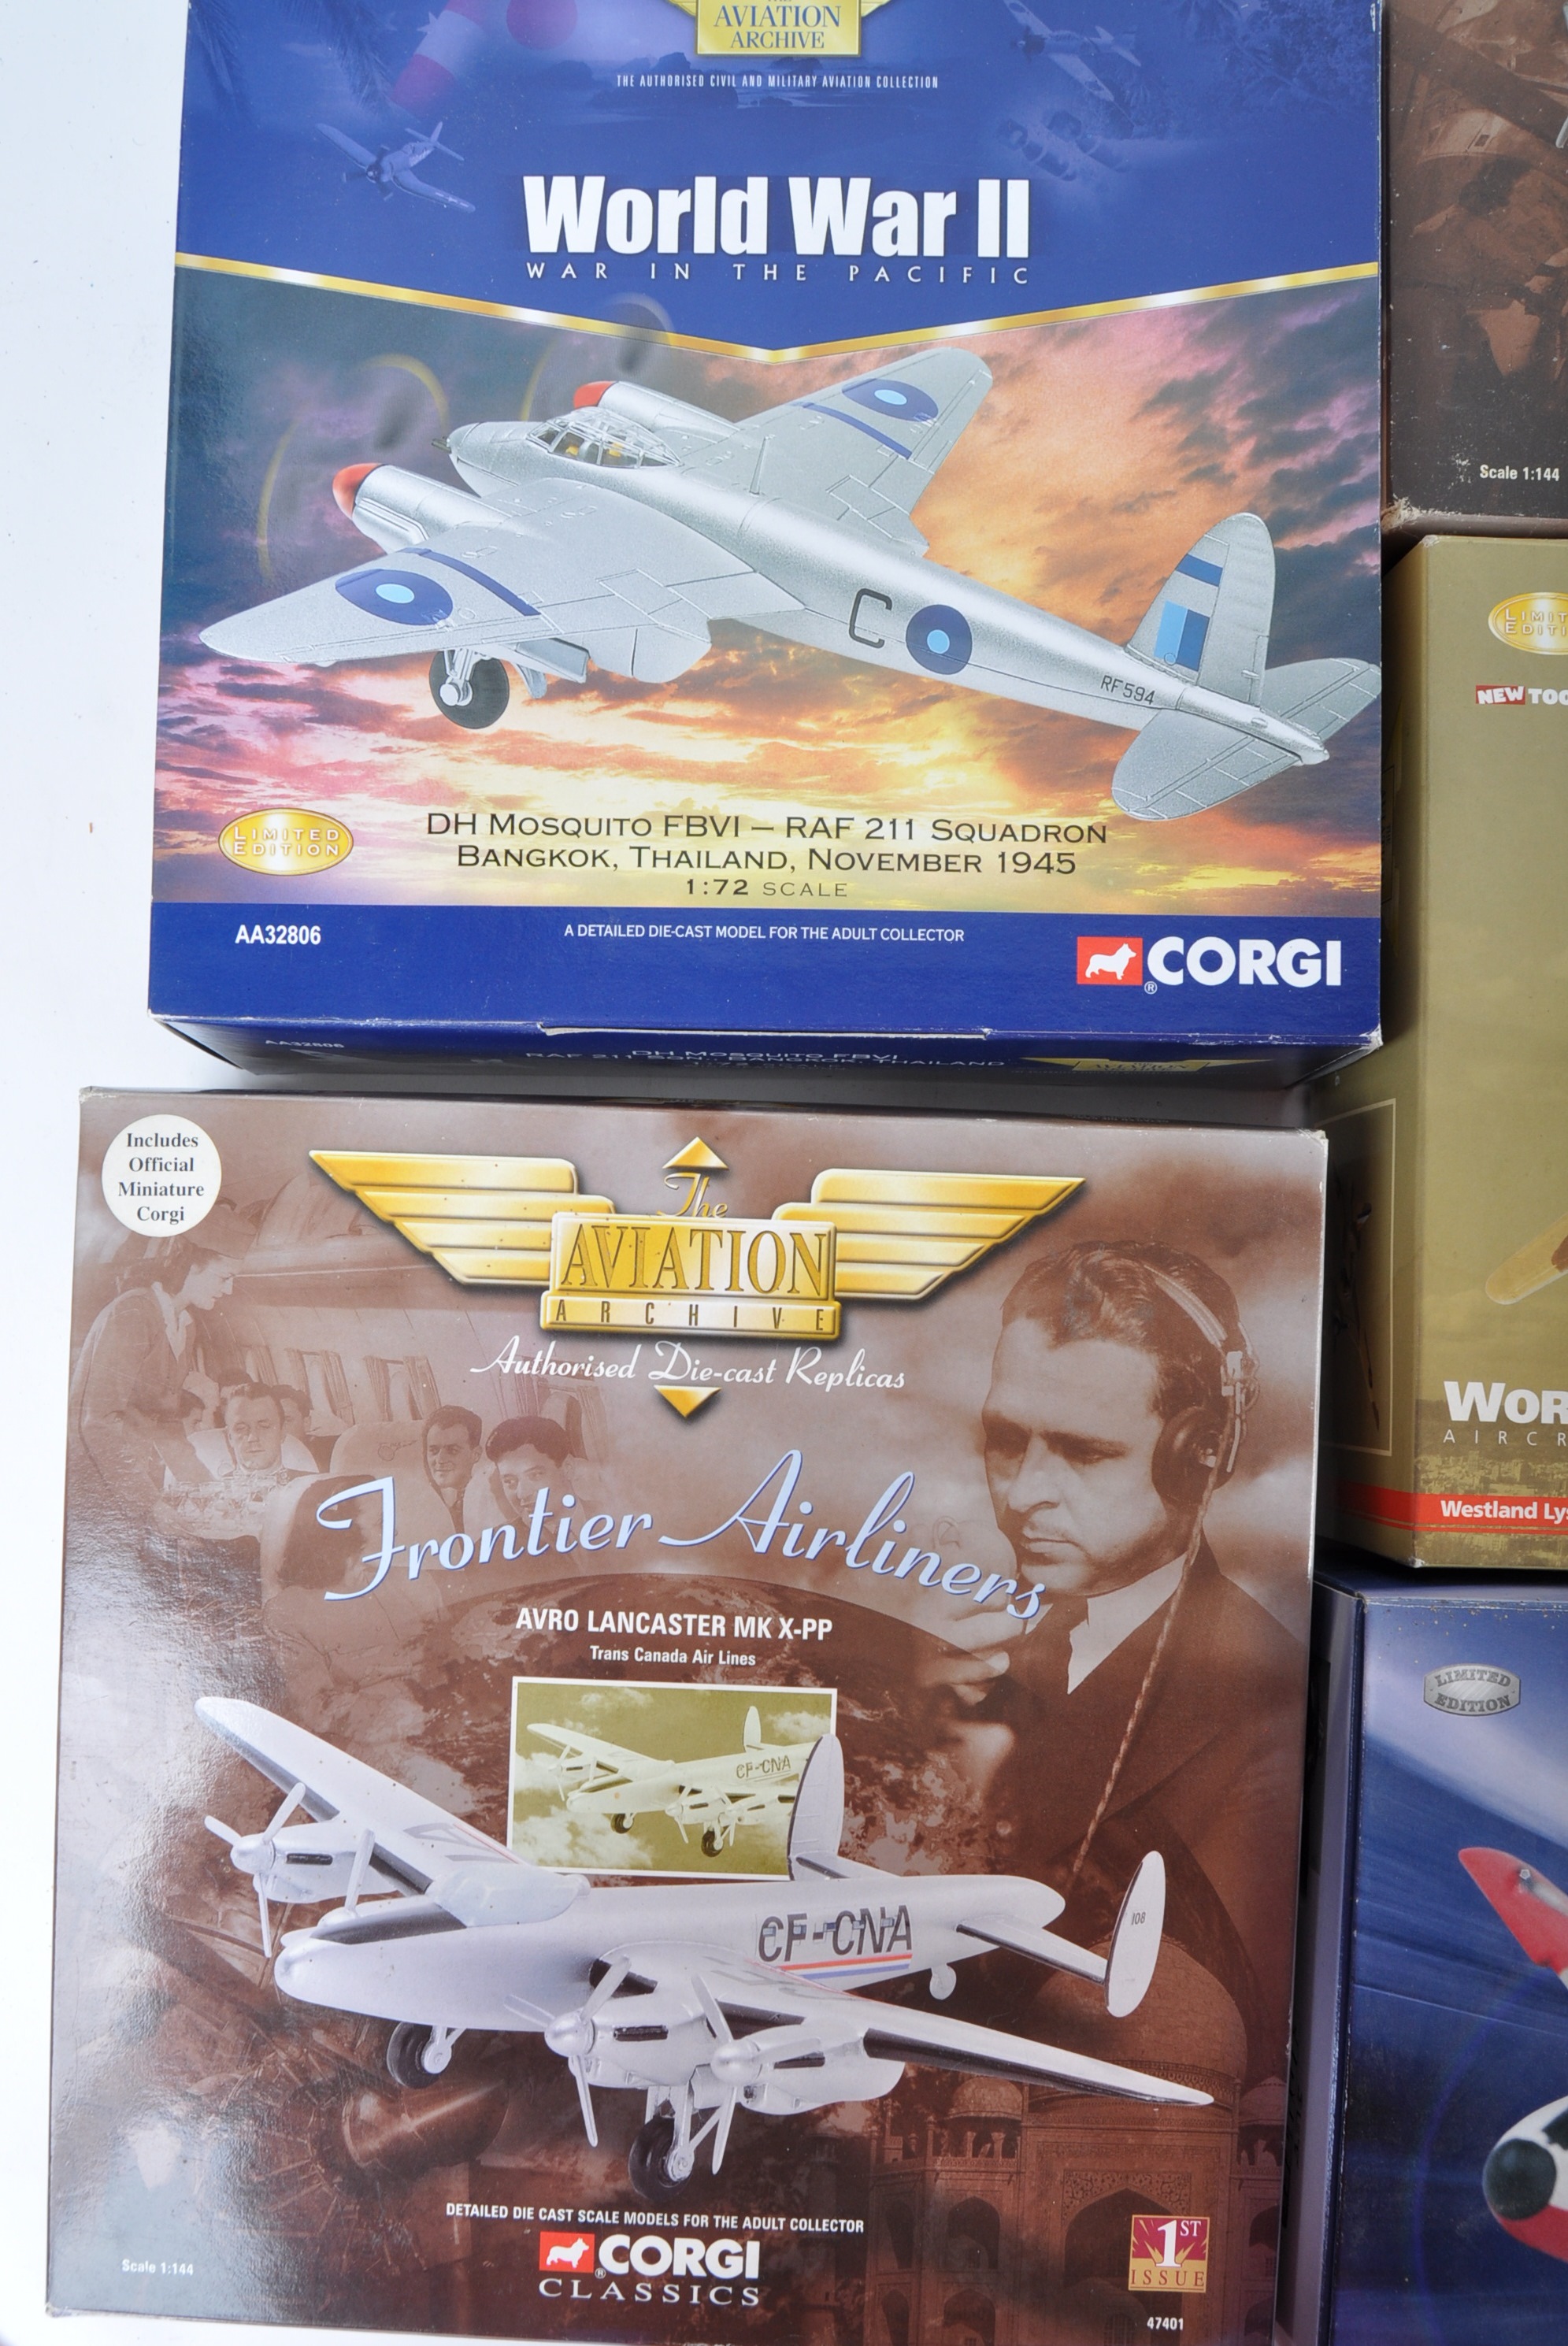 COLLECTION OF CORGI AVIATION ARCHIVE DIECAST MODEL PLANES - Image 2 of 7